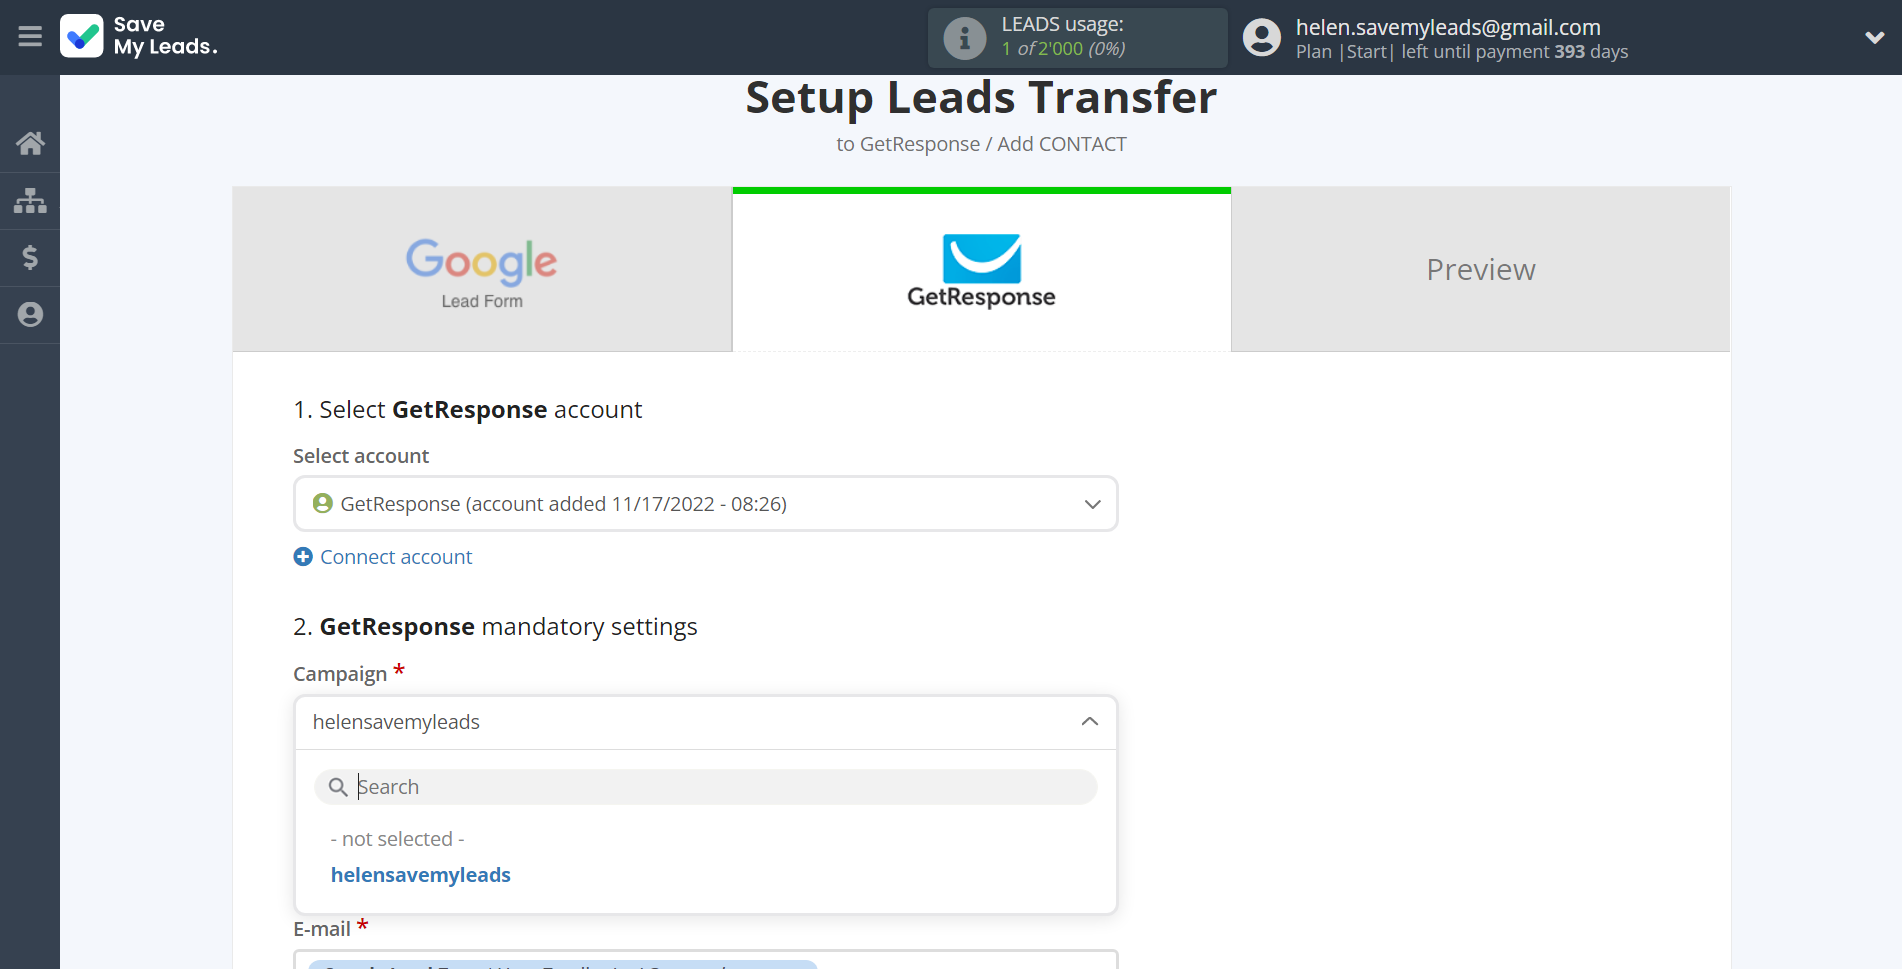 How to Connect Google Lead Form with GetResponse | Assigning fields